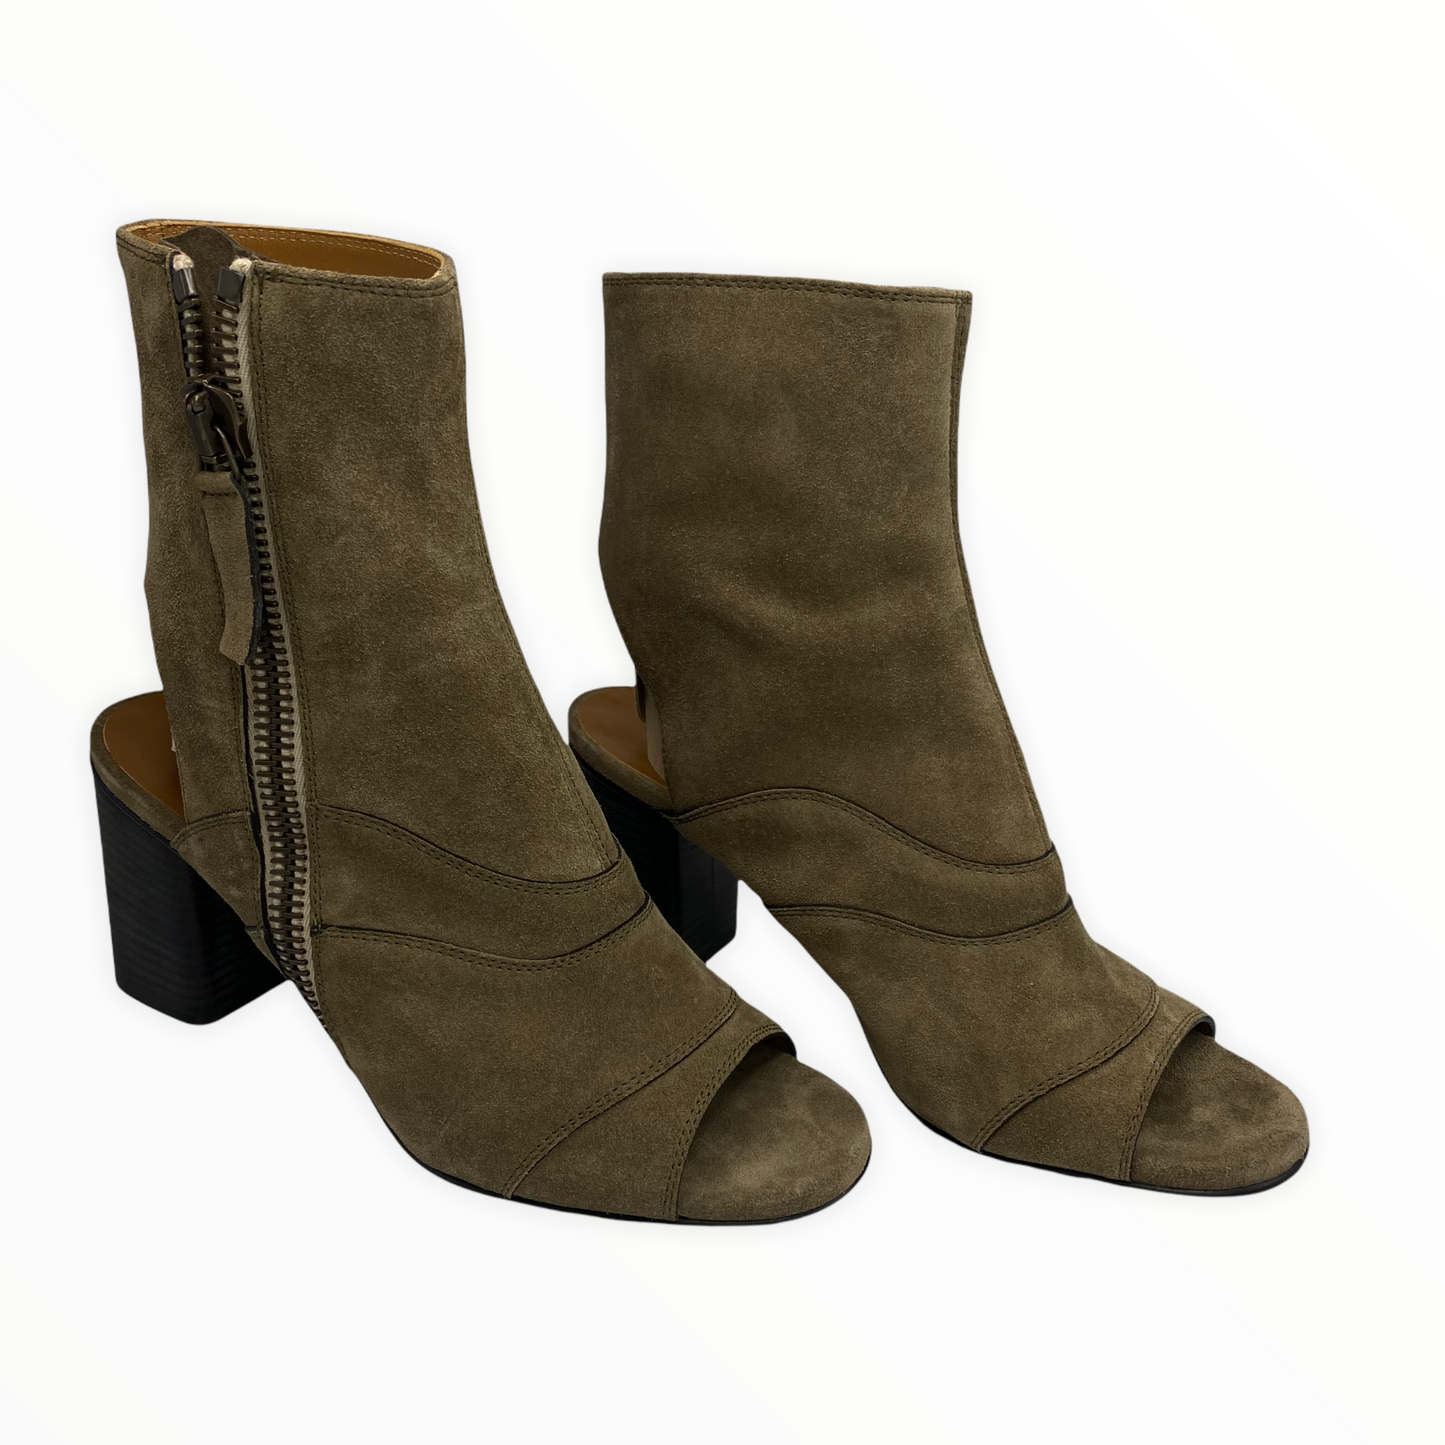 Lysis vintage Chloé open-toe boots - 38.5 - Fall 2016